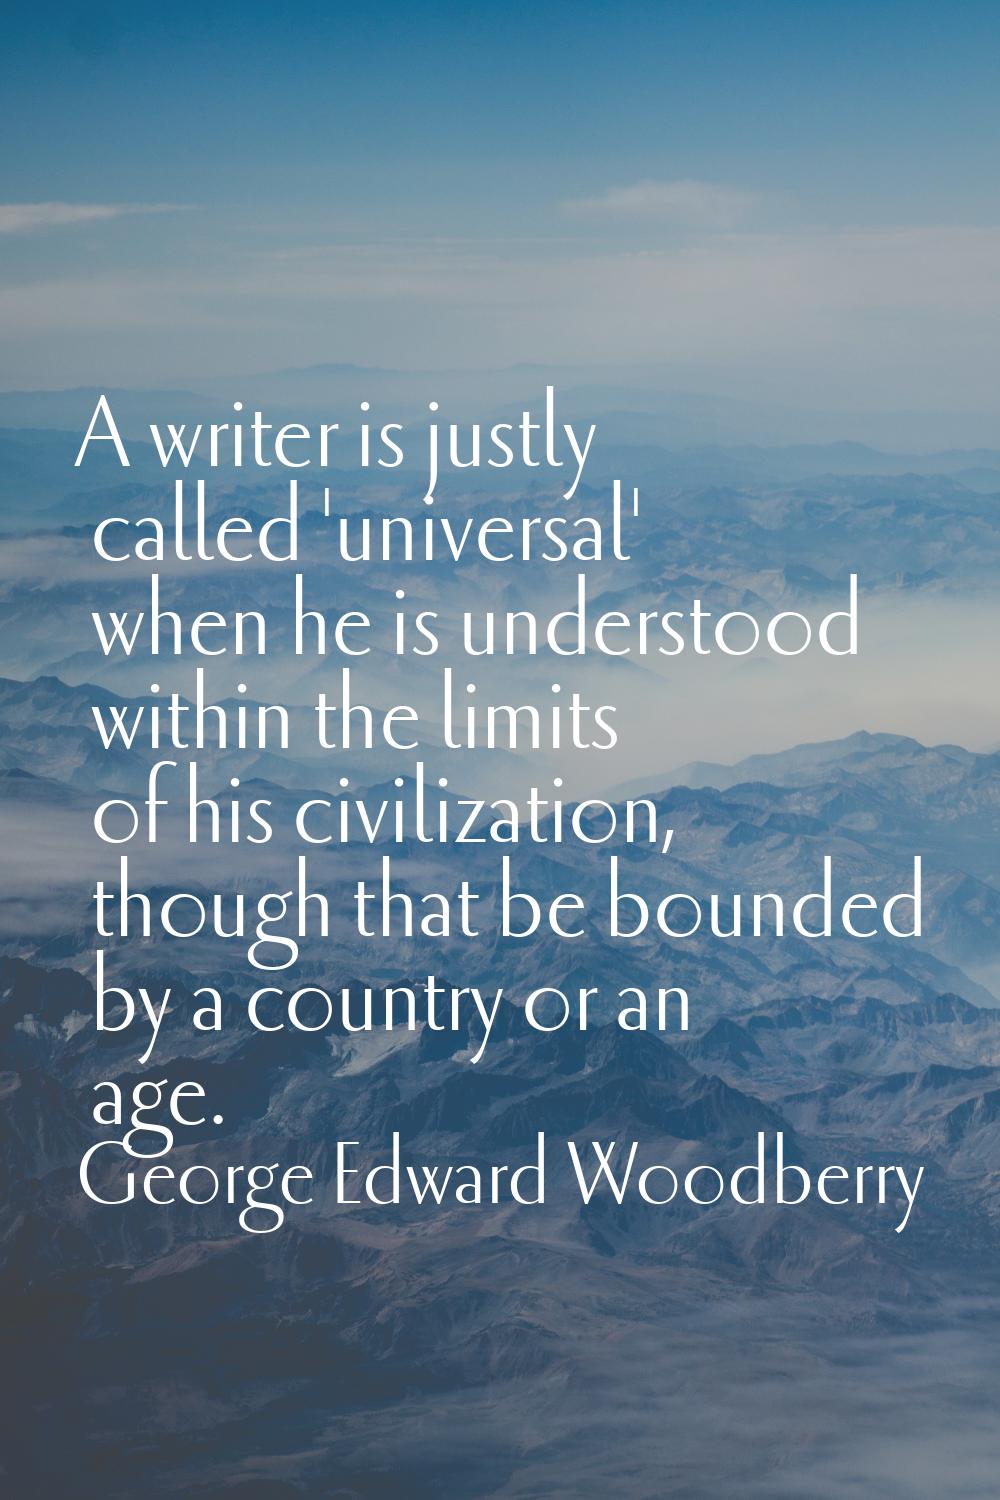 A writer is justly called 'universal' when he is understood within the limits of his civilization, 